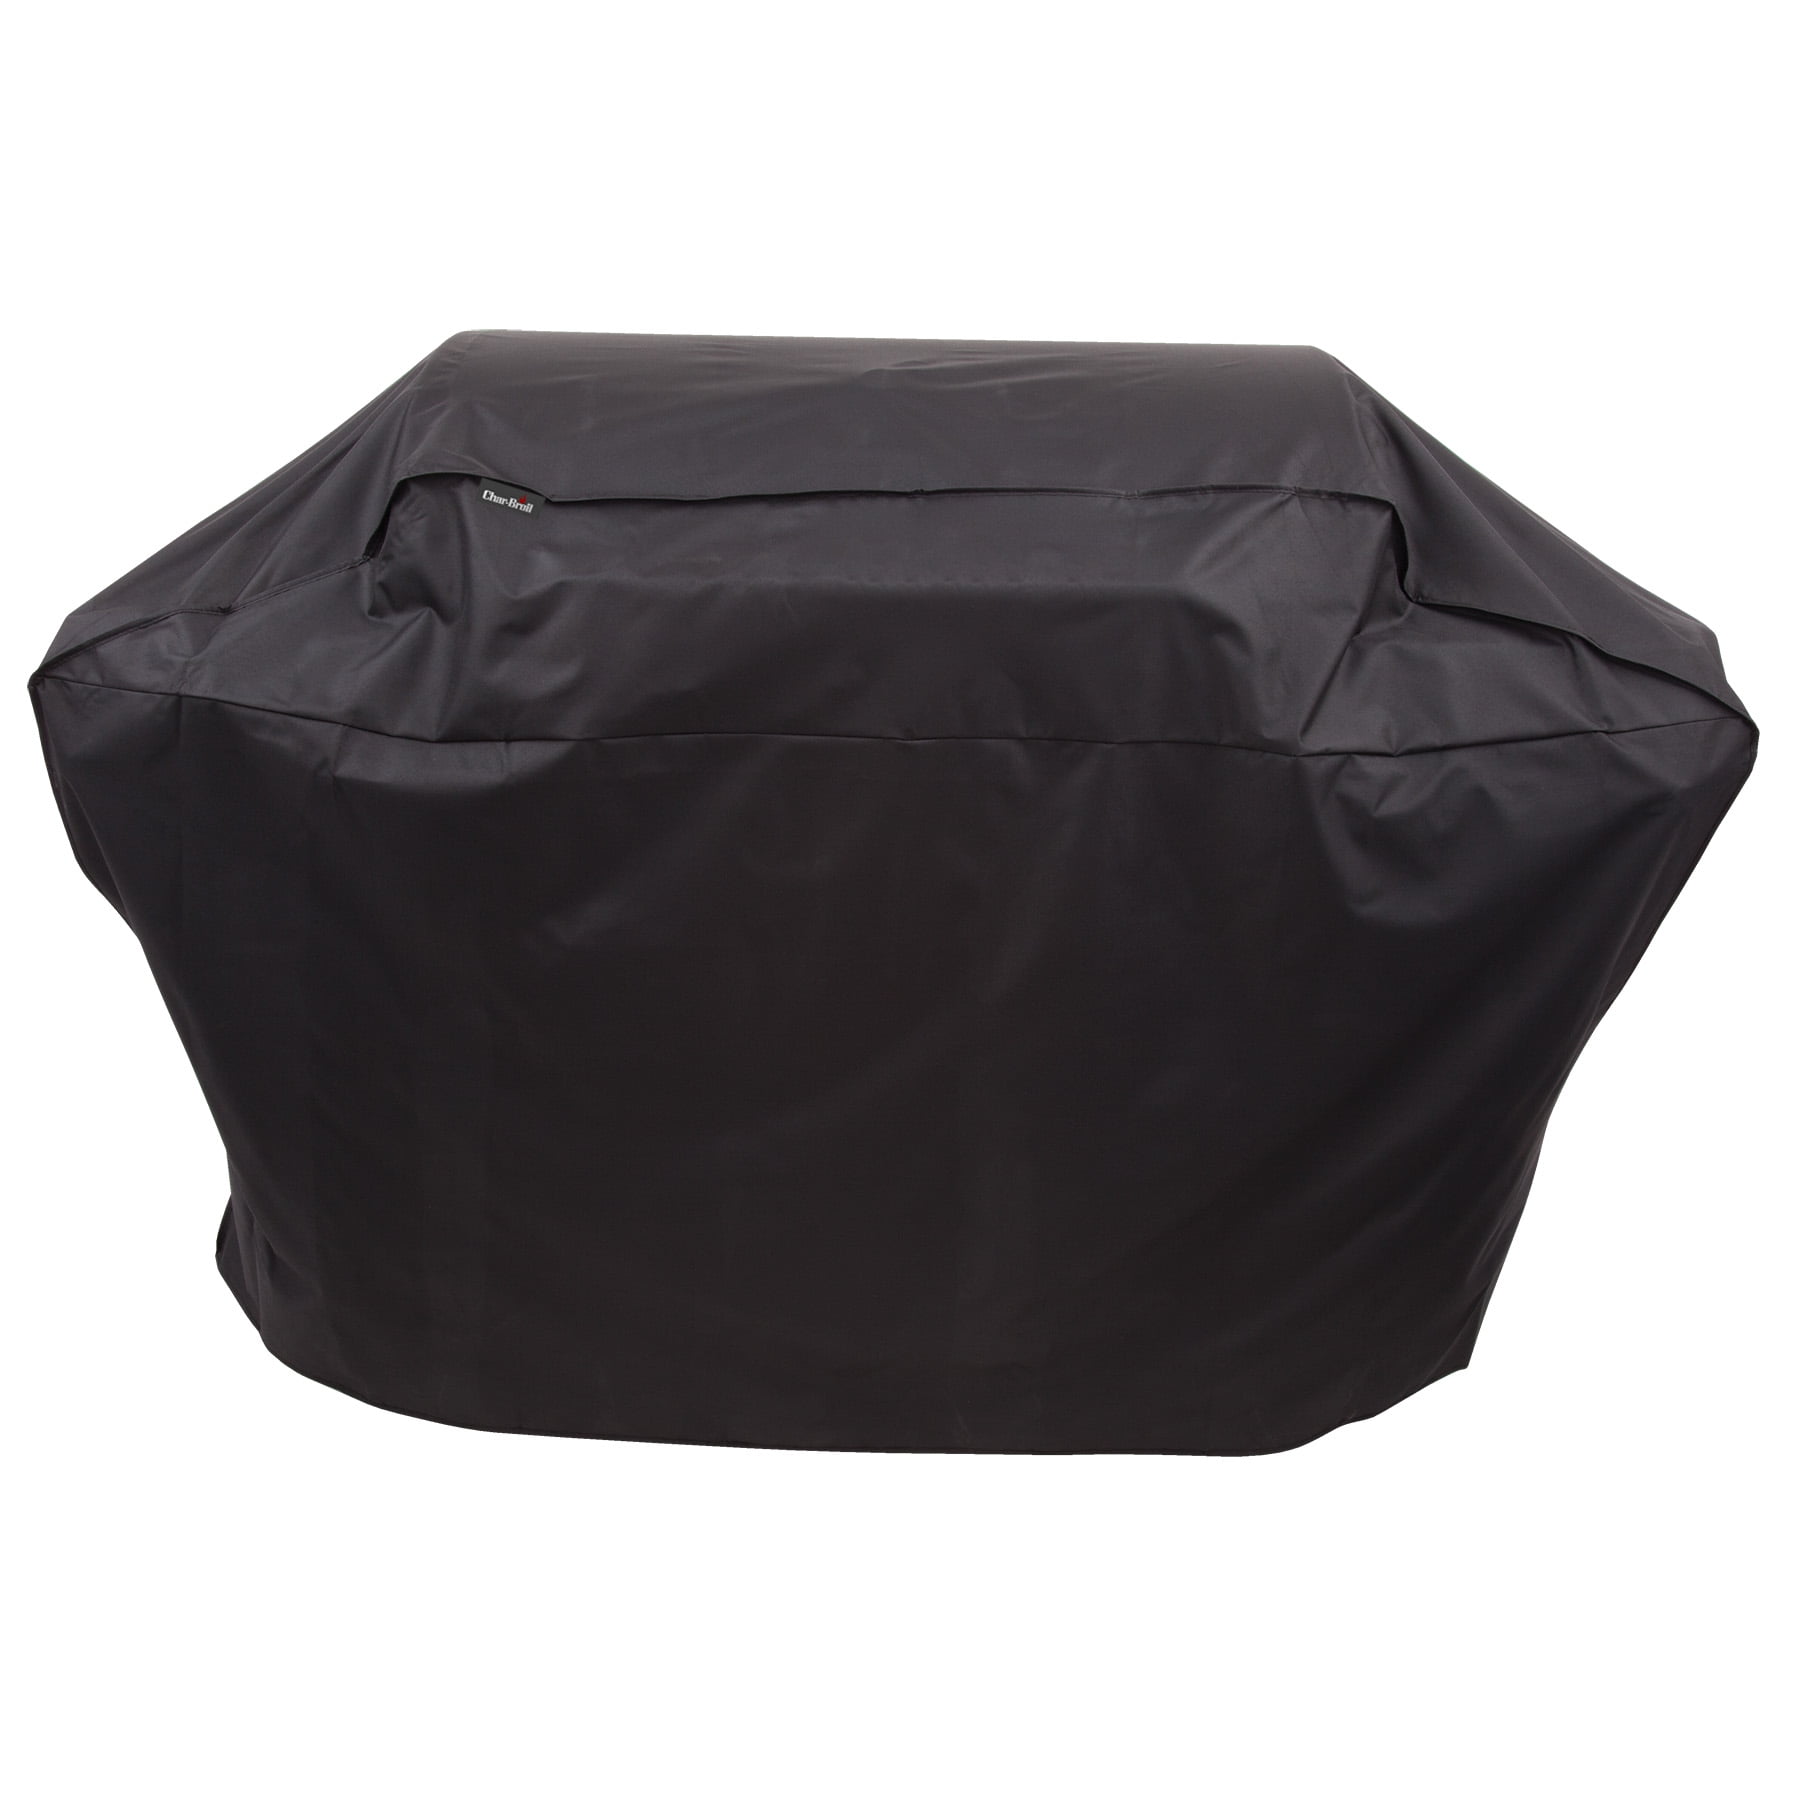 Smoker Cover Heavy Duty Fabric Polyester Premium Grill Outdoor Protective Black 